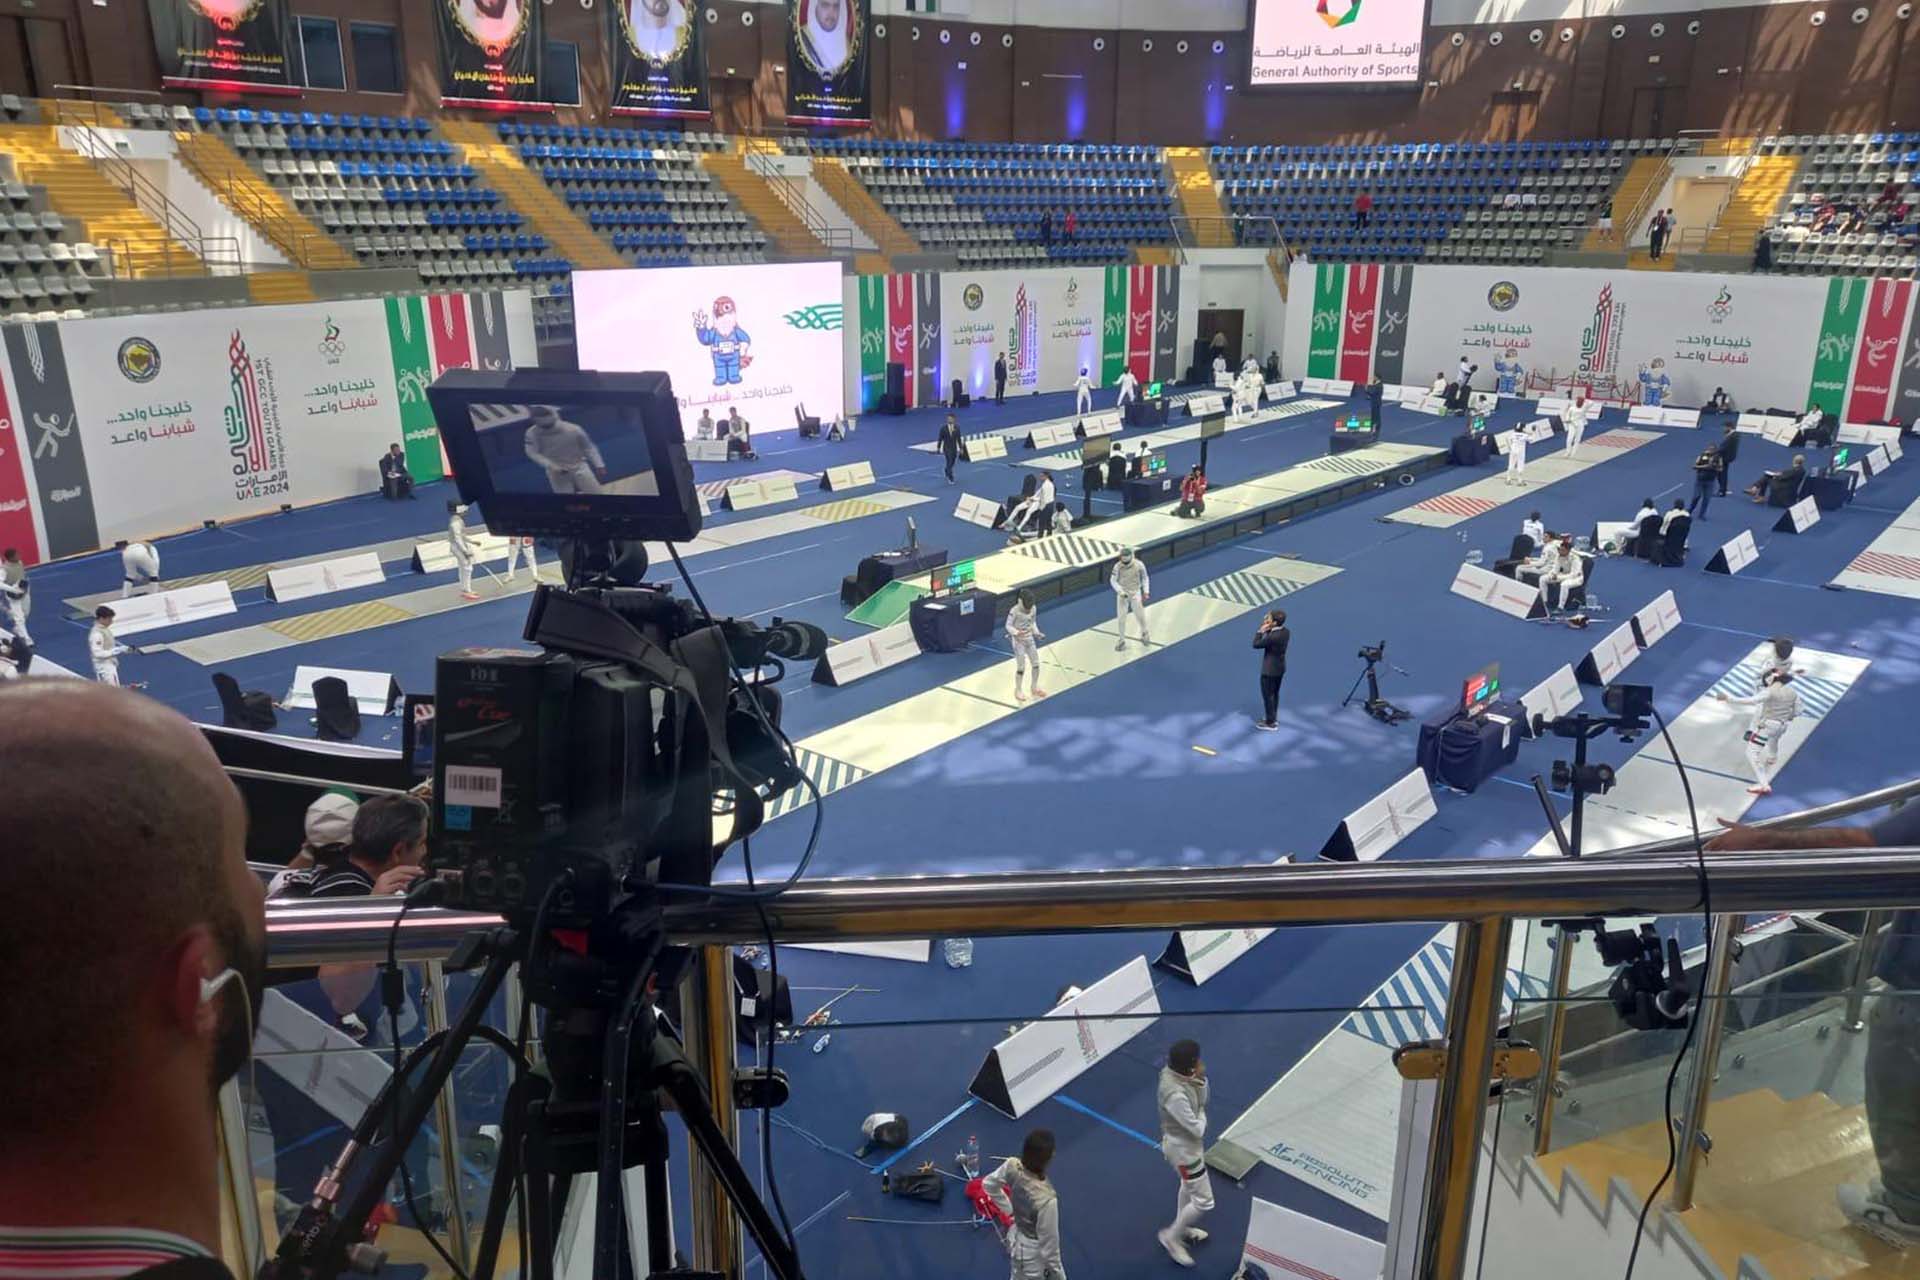 Dejero provides connectivity for live streaming of first ever Gulf Youth Games from sports venues across the United Arab Emirates